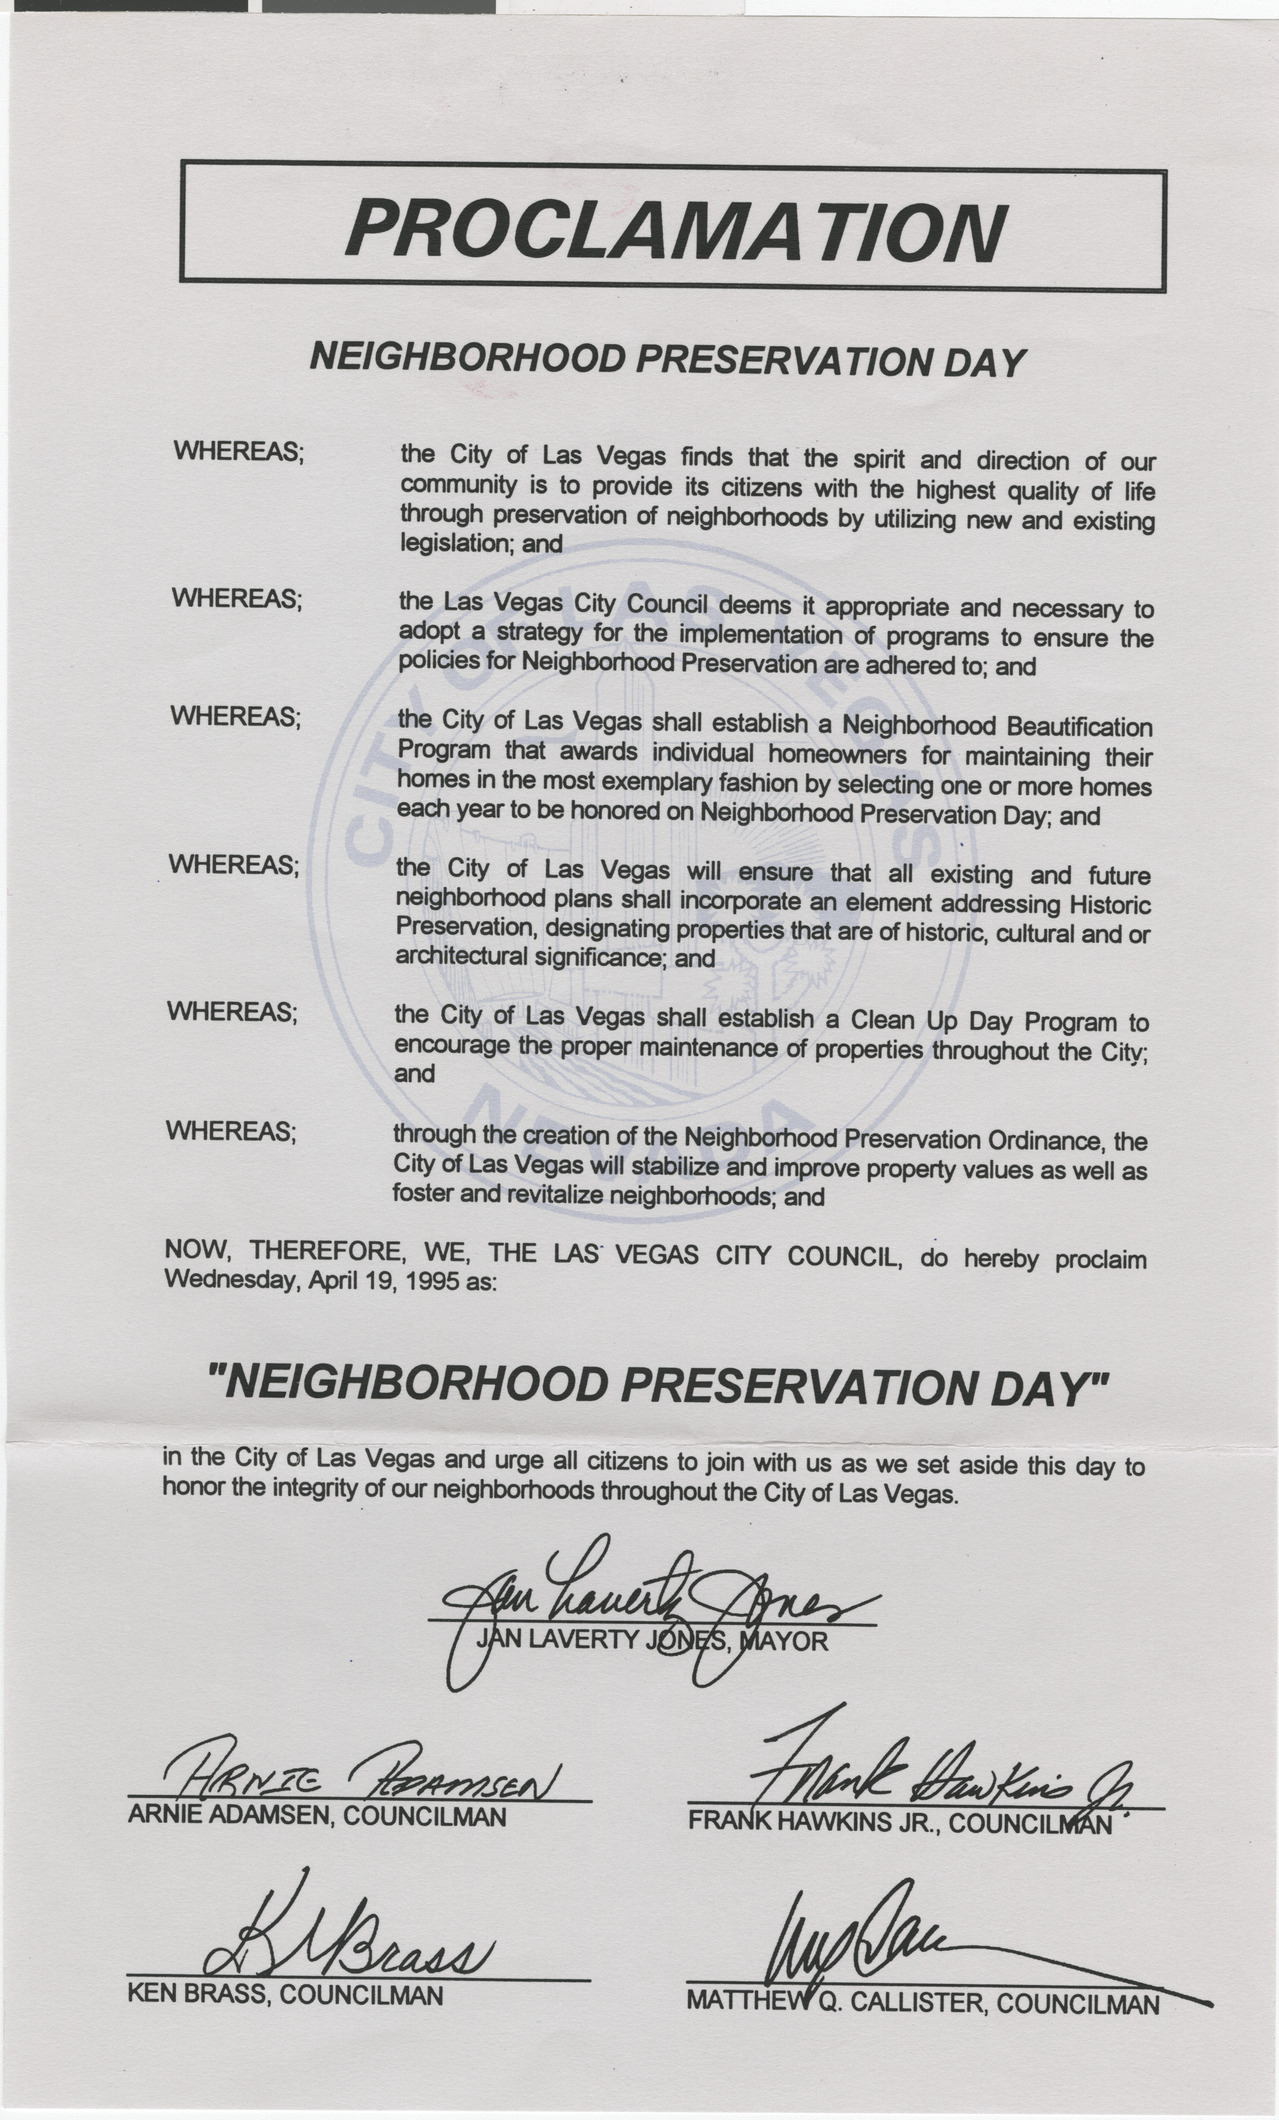 Proclamation for Neighborhood Preservation Day, 1995 (see also Box 1 Folder 13)